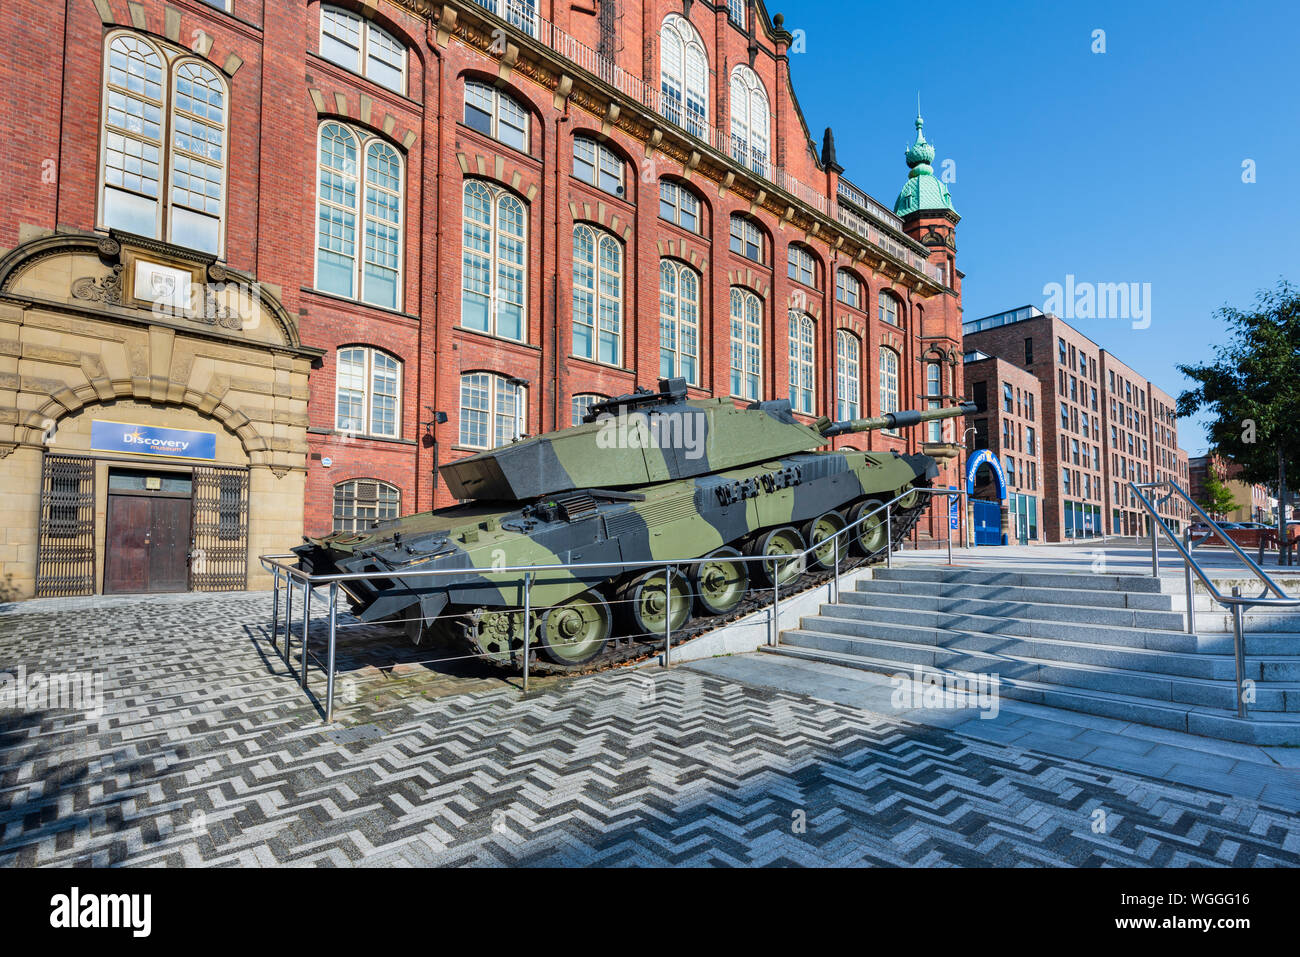 Challenger 2 tank, built in Newcastle upon Tyne and donated to the Discovery Museum by BAE Systems. The military vehicle now stands Challenger Plaza Stock Photo